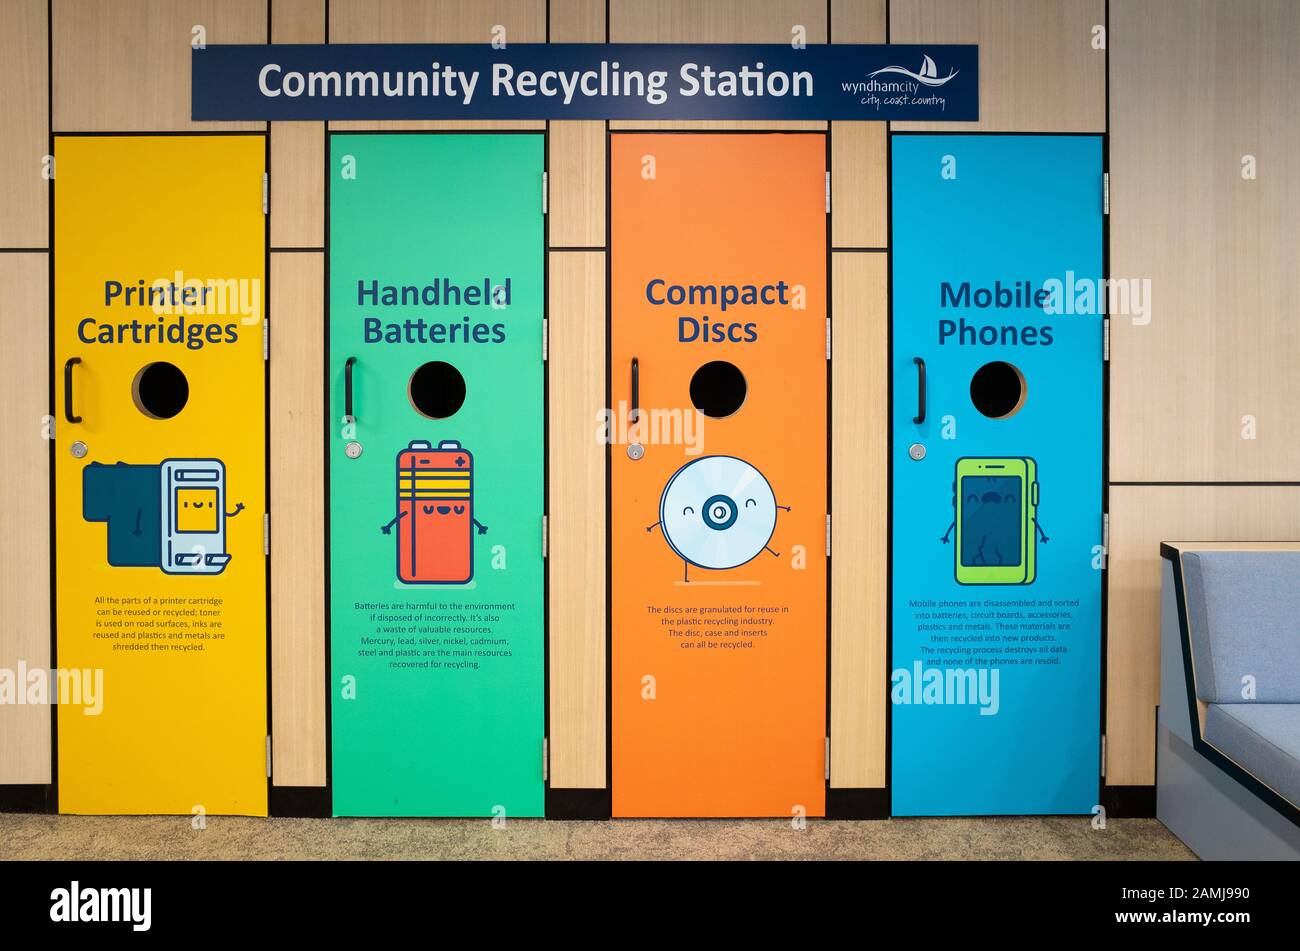 Community recycling bins of some small e-waste including mobile phones and compact discs in a suburb. Melbourne. VIC Australia Stock Photo